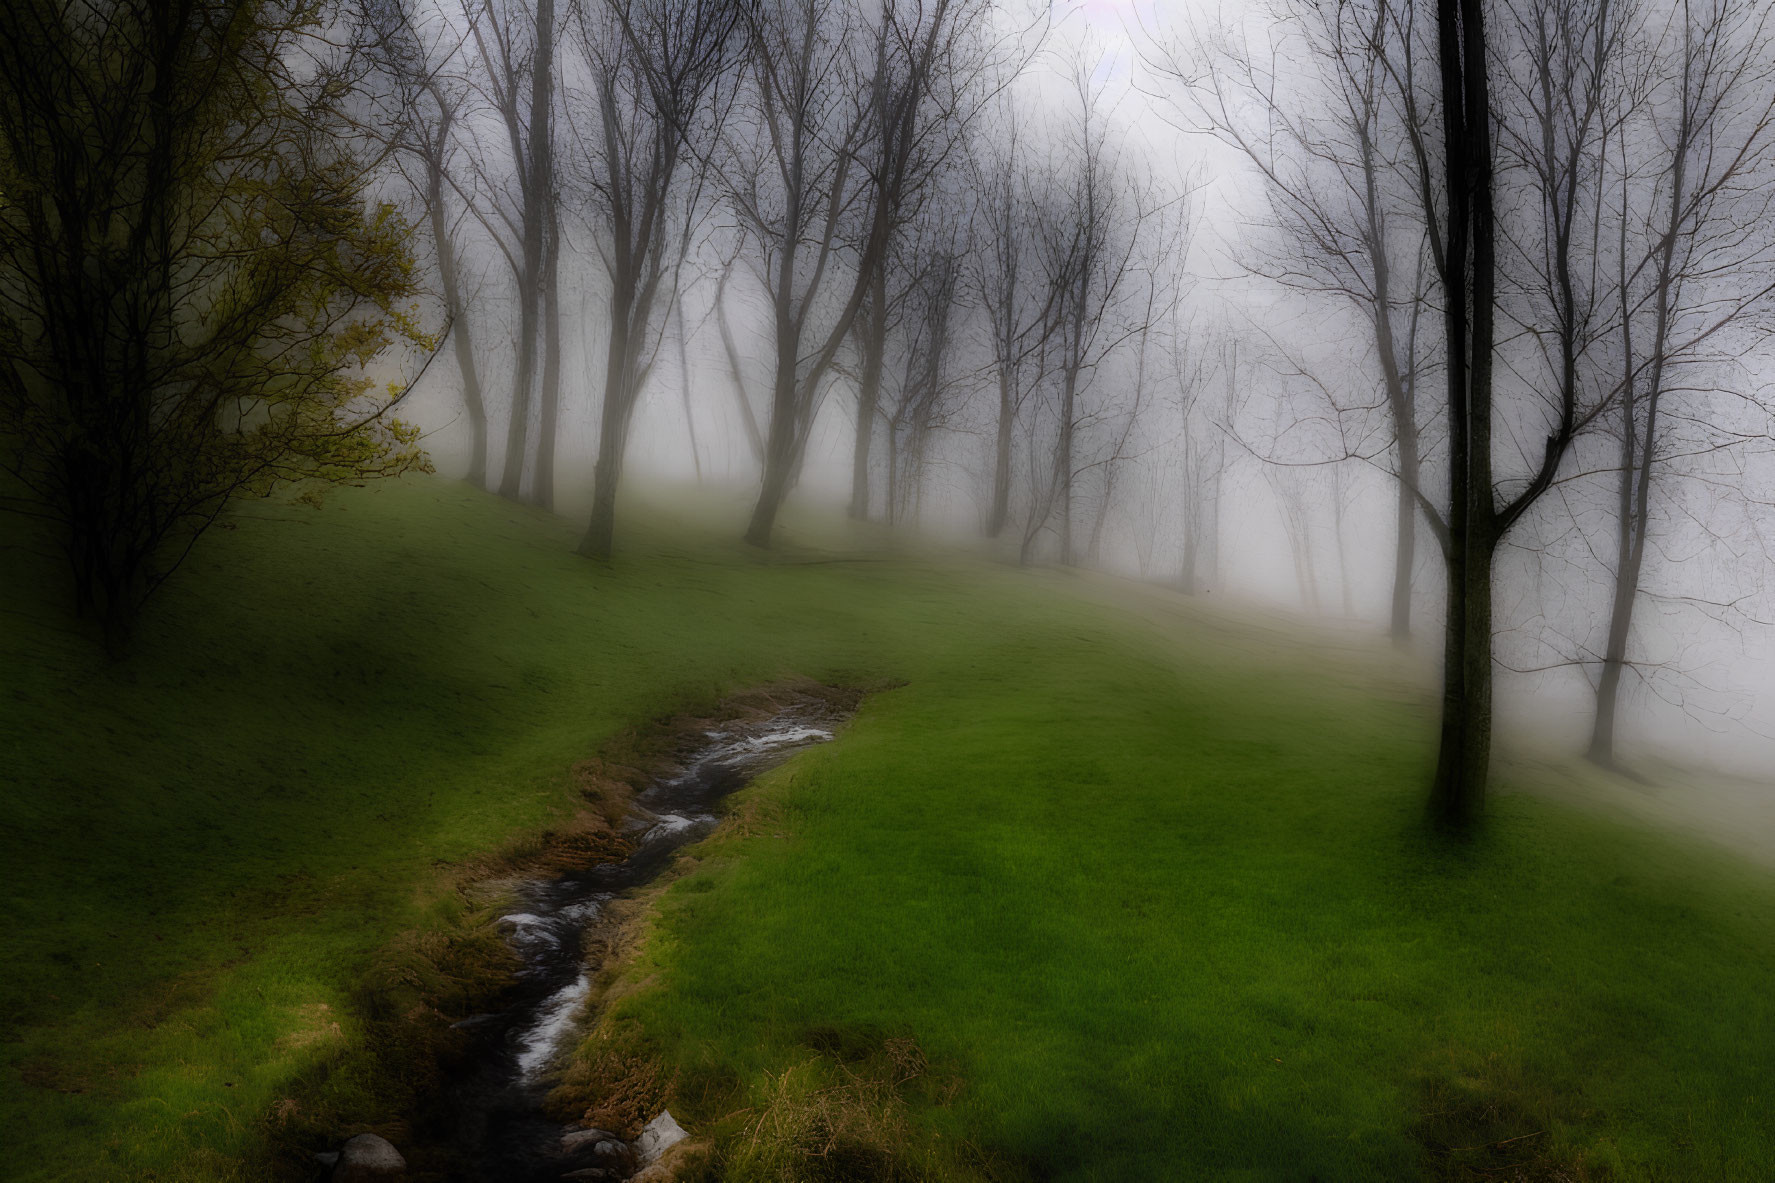 Foggy landscape with stream, bare trees, and green grass